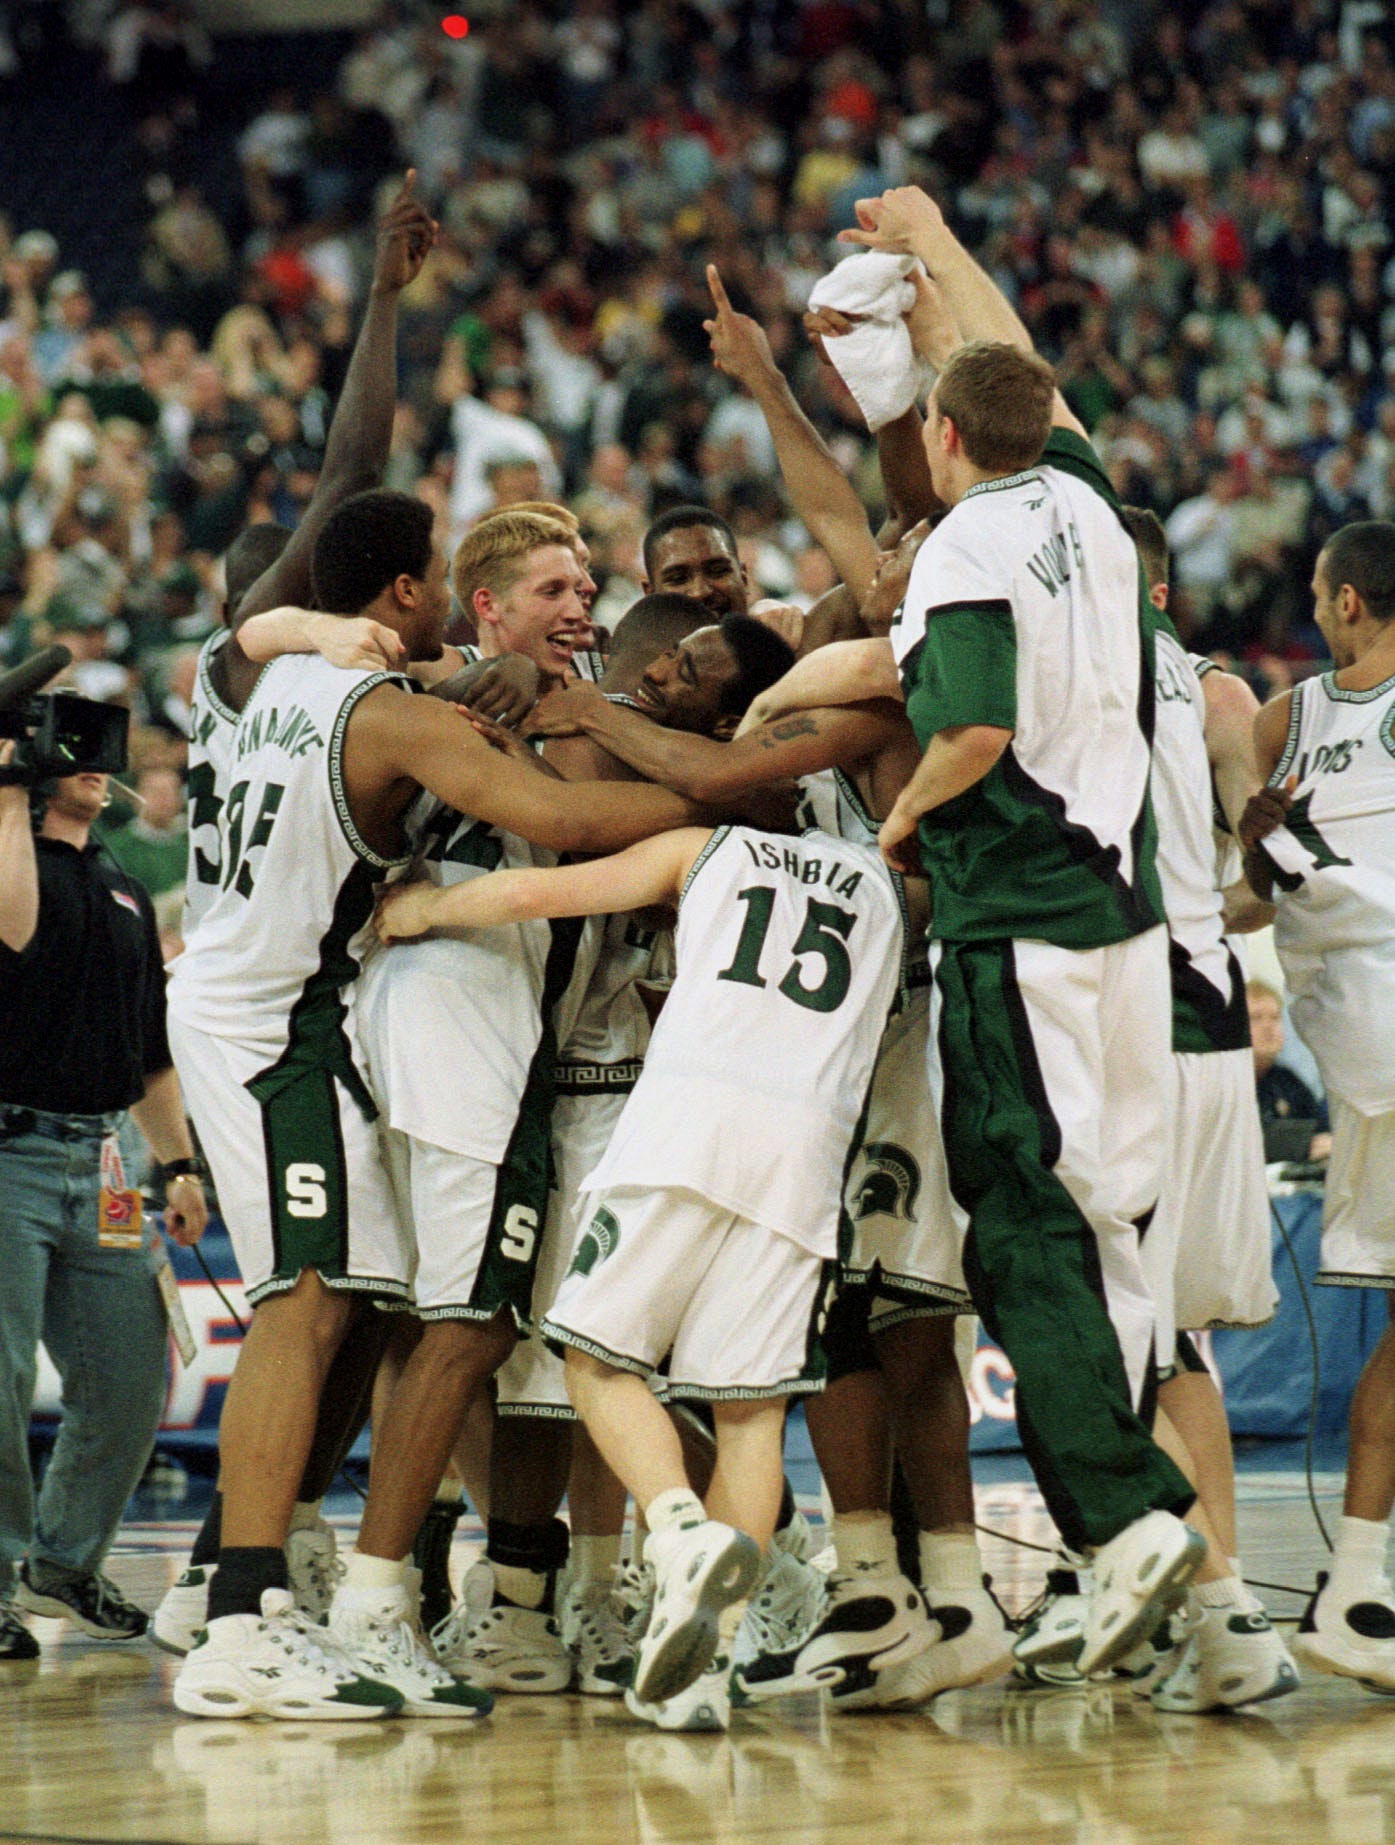 Michigan State ' s Mateen Cleaves is mobbed by his teammates after the Spartans defeated Florida to win the national title.